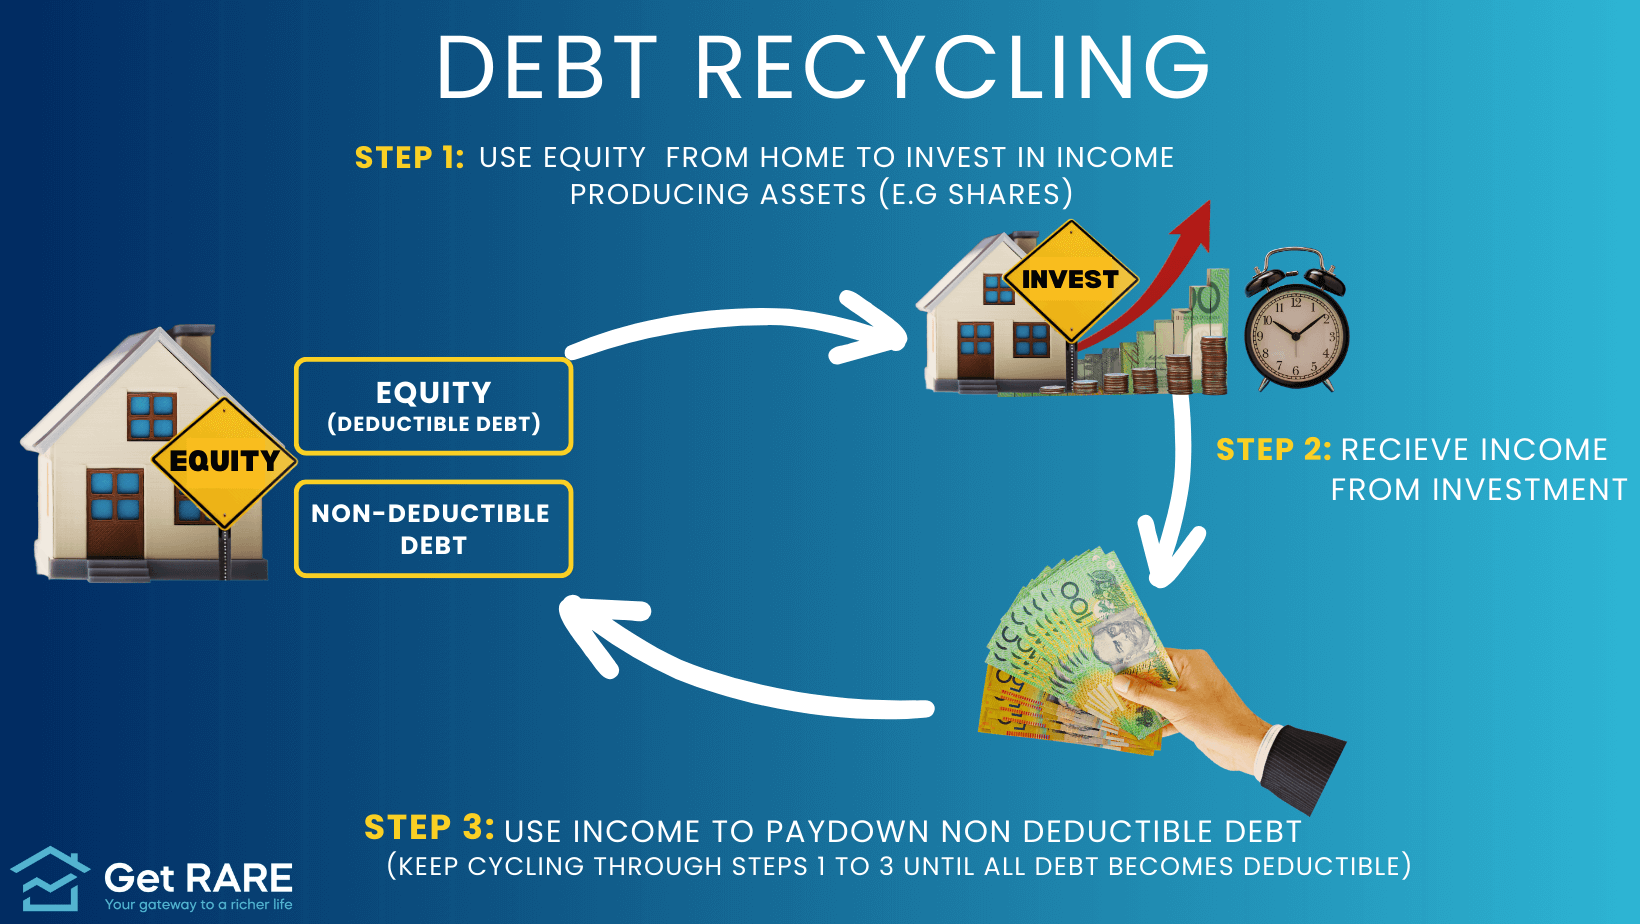 Simple steps of debt recycling